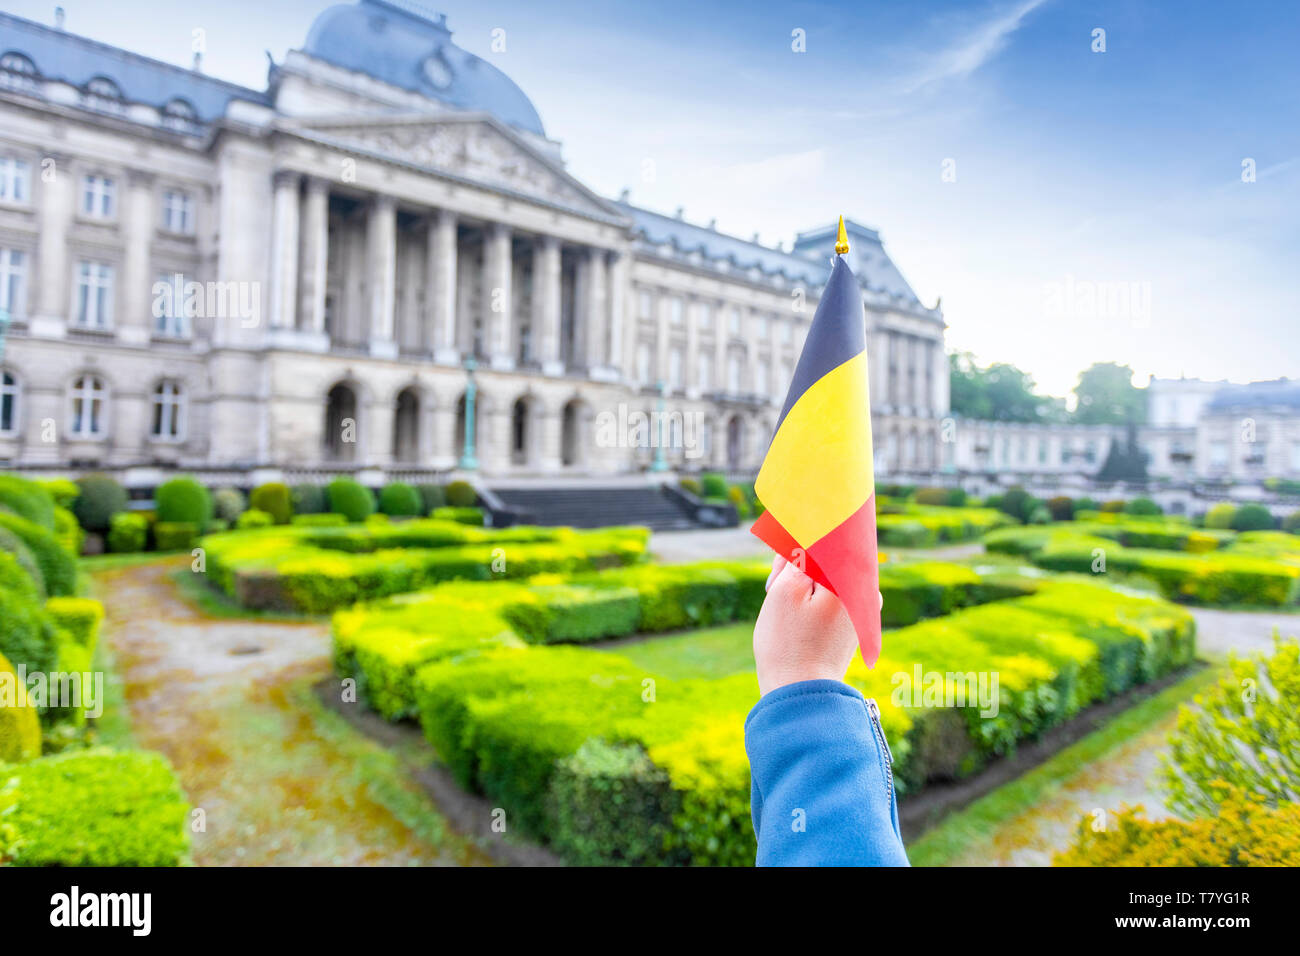 Royal Palace of Brussels and flag of Belgium in female hand, Belgium Stock Photo